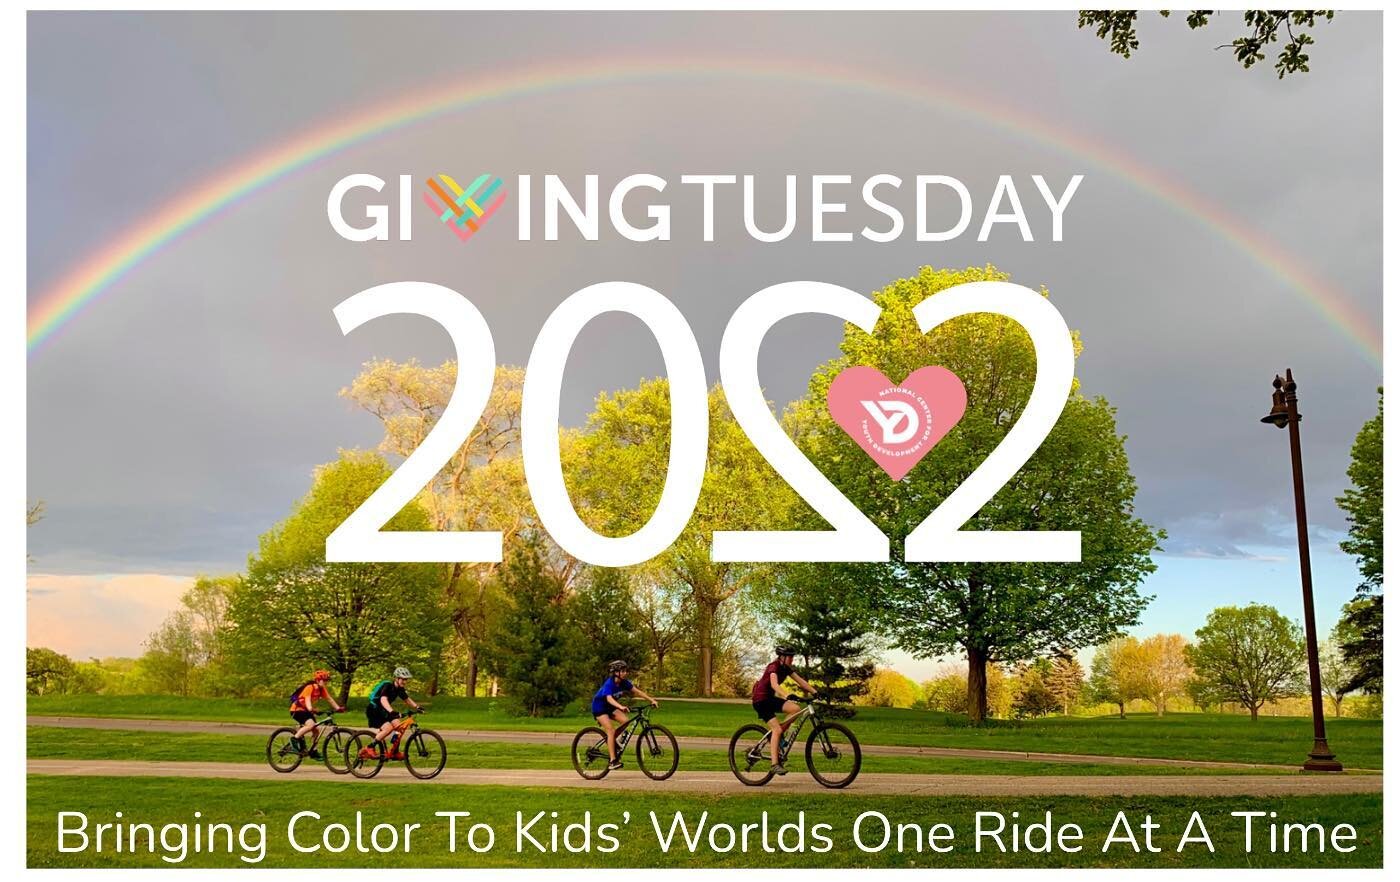 🌈Help contribute to that pot of gold⚱️

CLICK BELOW TO DONATE:

https://www.givemn.org/story/306bbf

Thank you🙏🏽

@national_youth_development @givemn @givingtuesday #givingtuesday2022 #givingtuesdaymn #givingtuesday #rainbows #potofgold